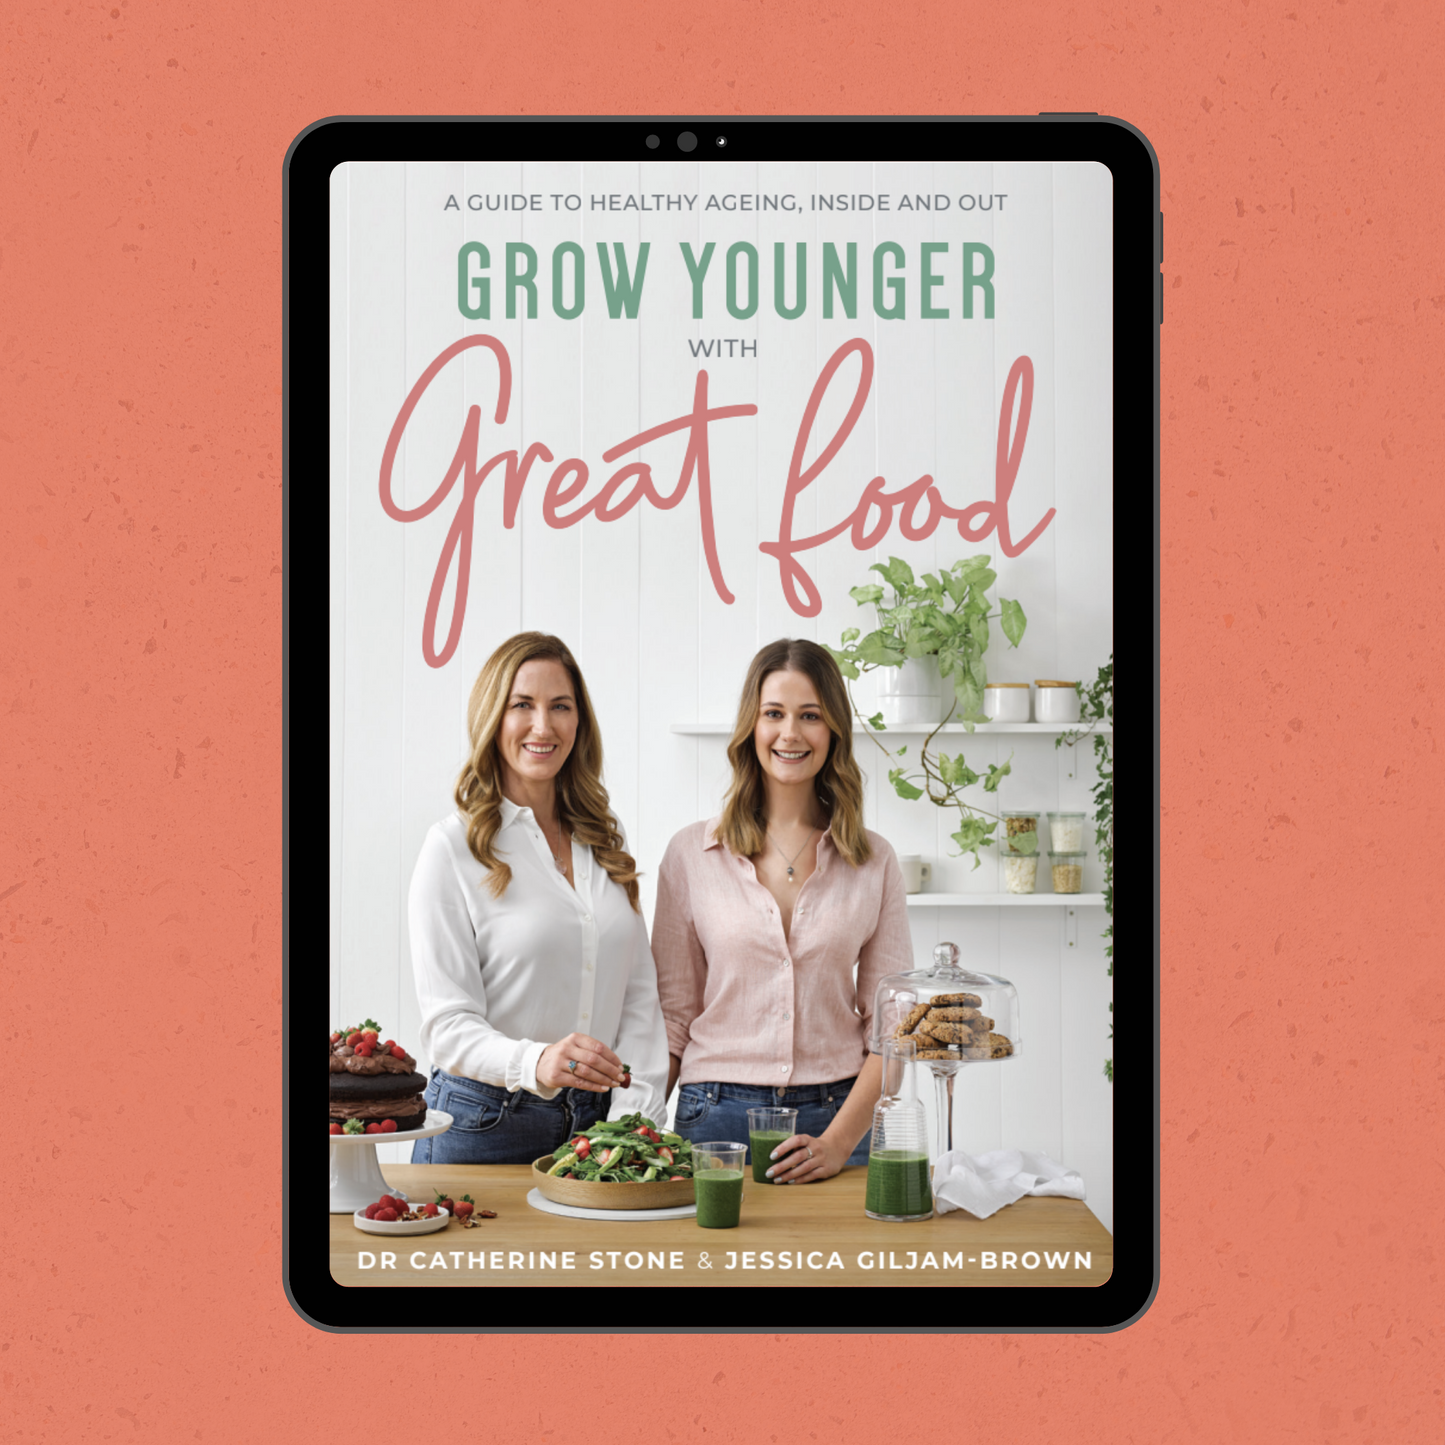 Grow Younger with Great Food eBook